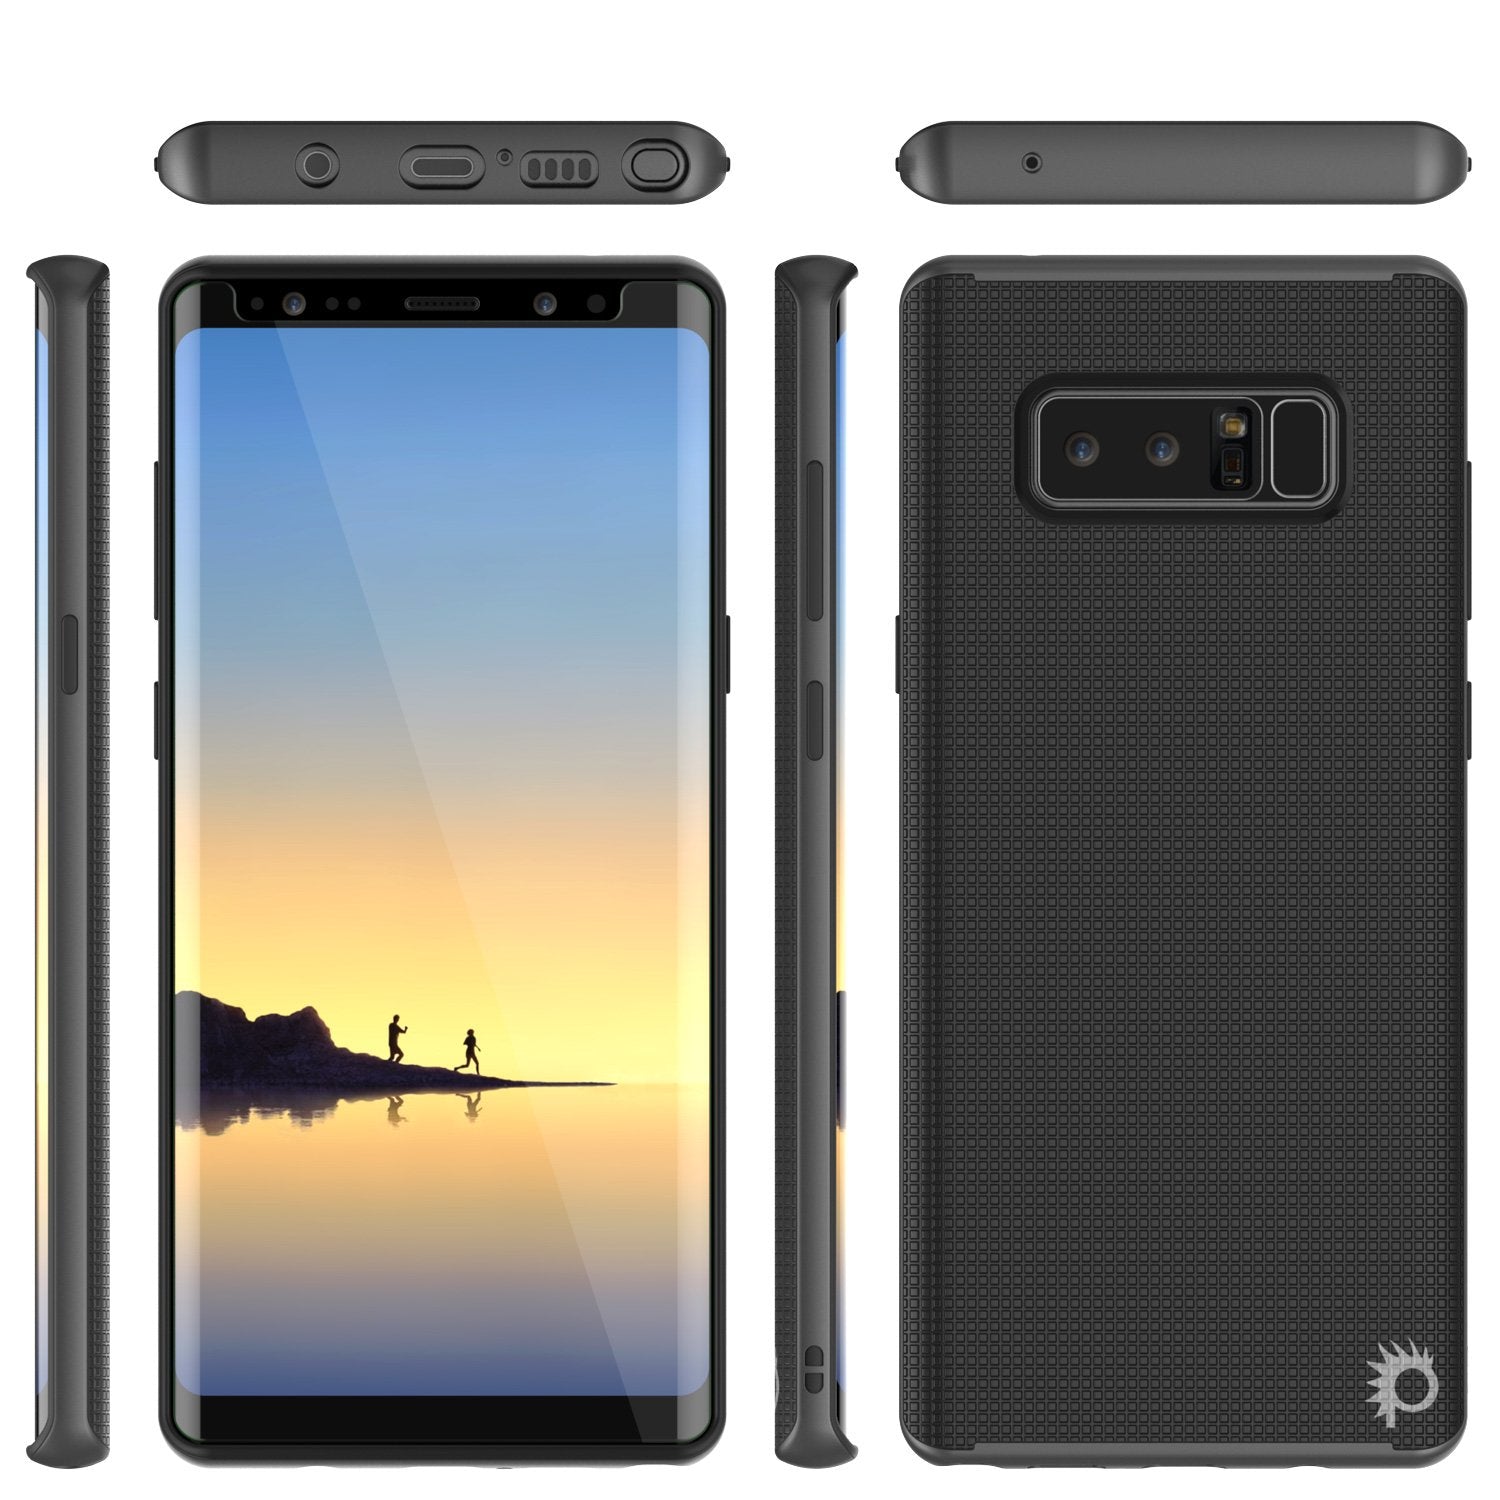 Galaxy Note 8 Case, PunkCase [Stealth Series] Hybrid 3-Piece Shockproof Dual Layer Cover [Non-Slip] [Soft TPU + PC Bumper] with PUNKSHIELD Screen Protector for Samsung Note 8 [Grey] - PunkCase NZ